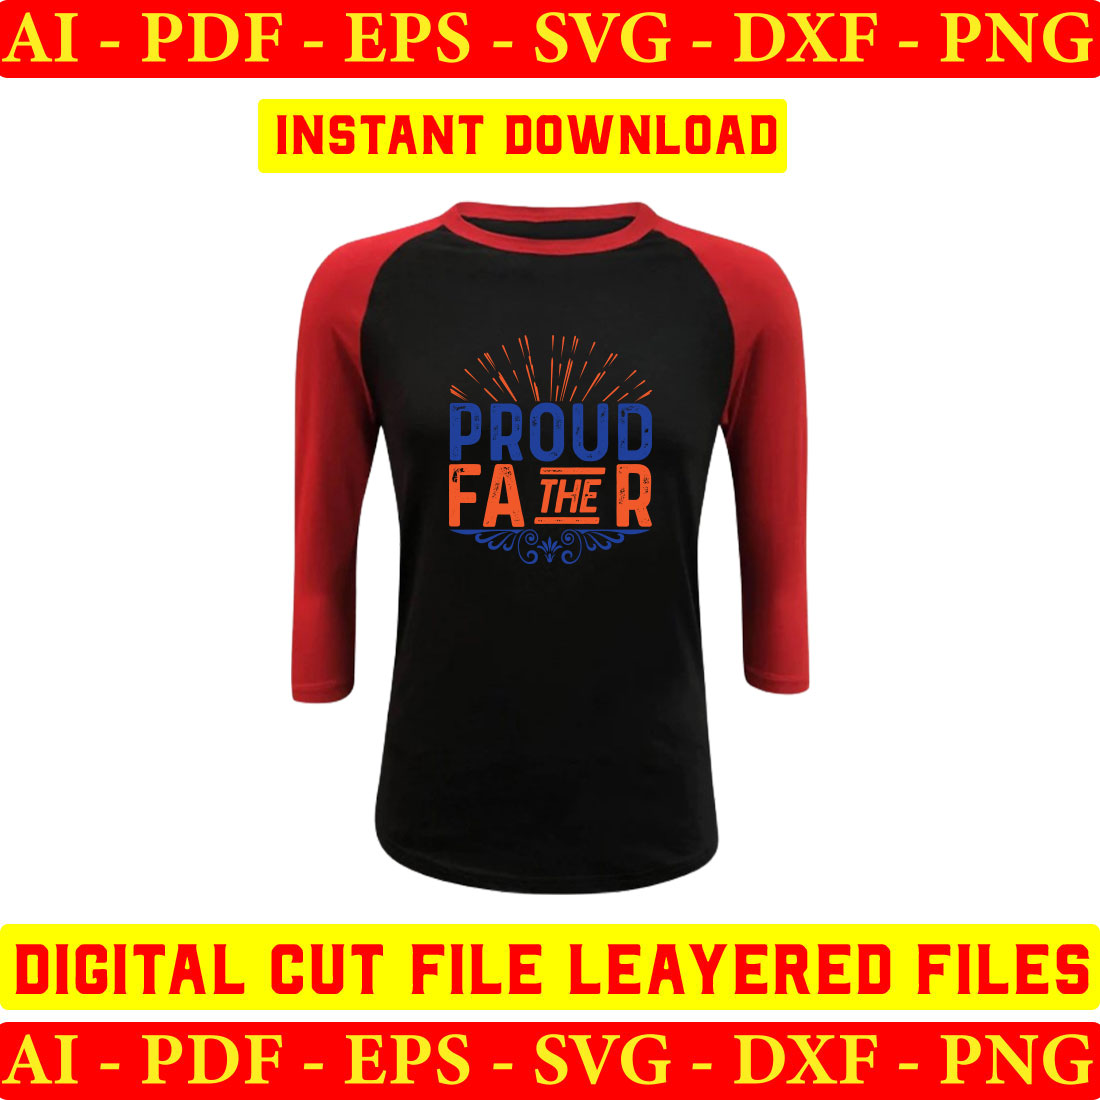 Black and red baseball shirt with the words proud to the father on it.